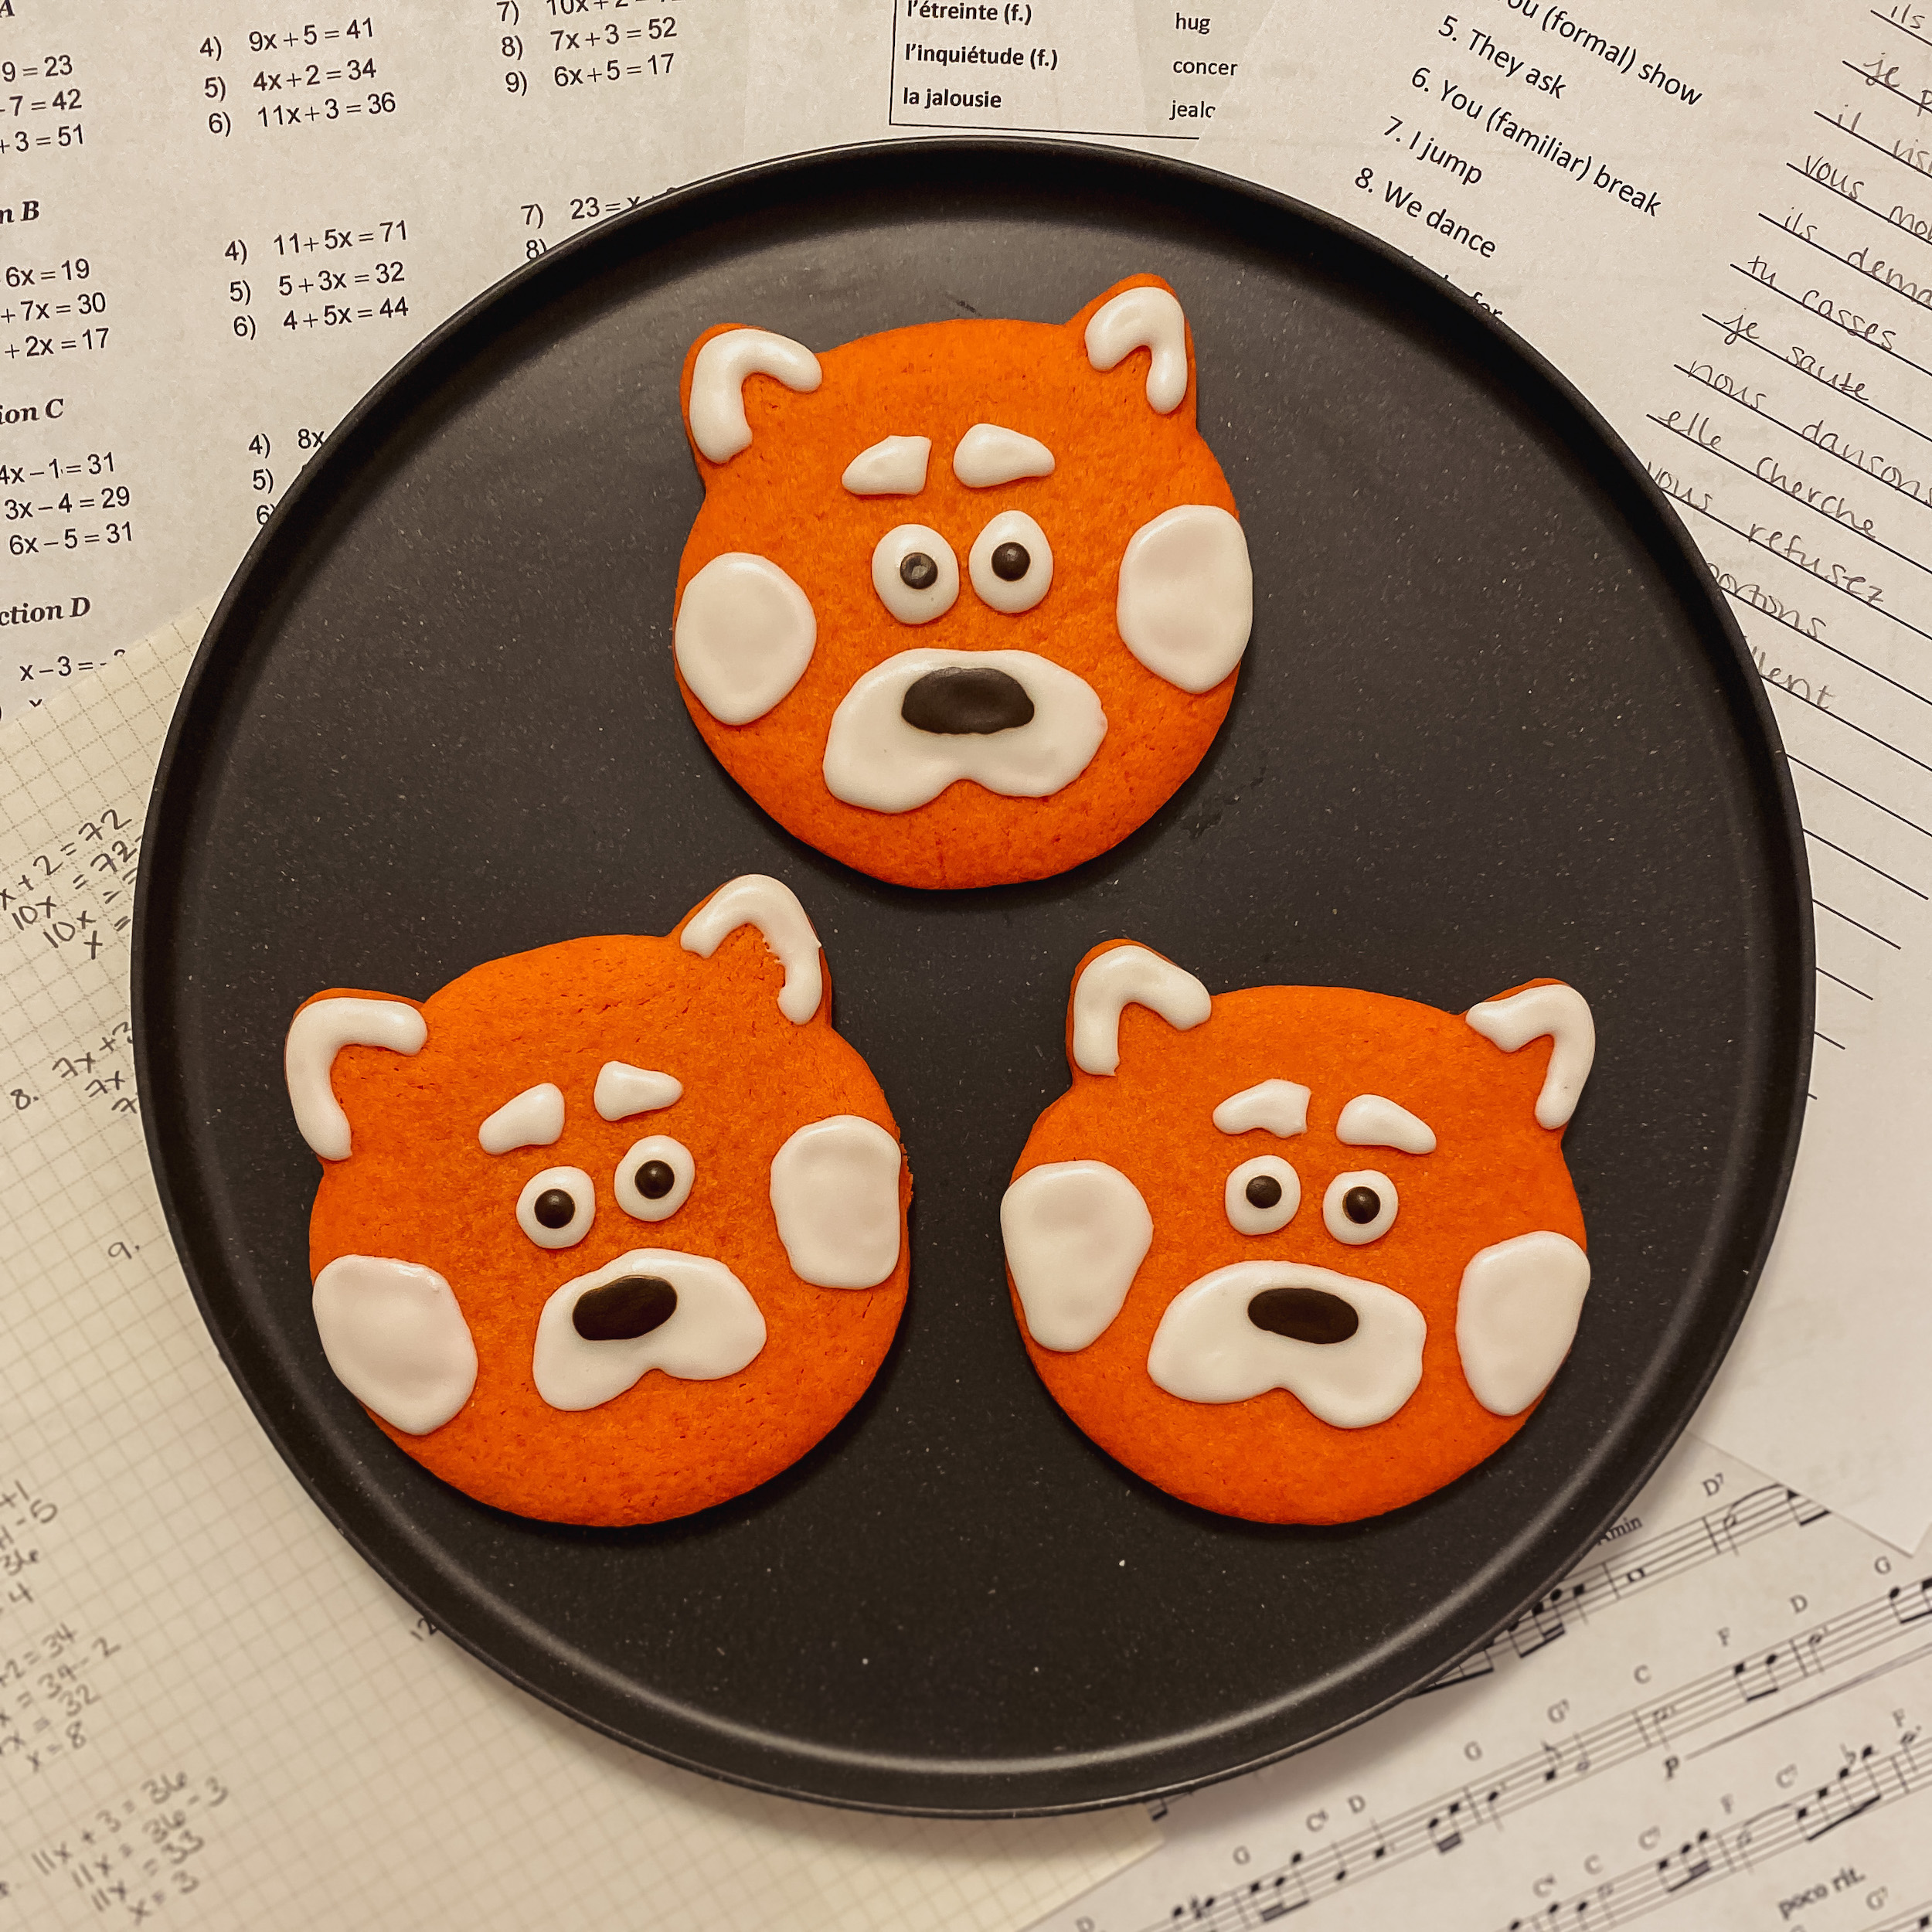 Three Mei's Panda Cookies, red panda shaped cookies with royal icing, on a plate